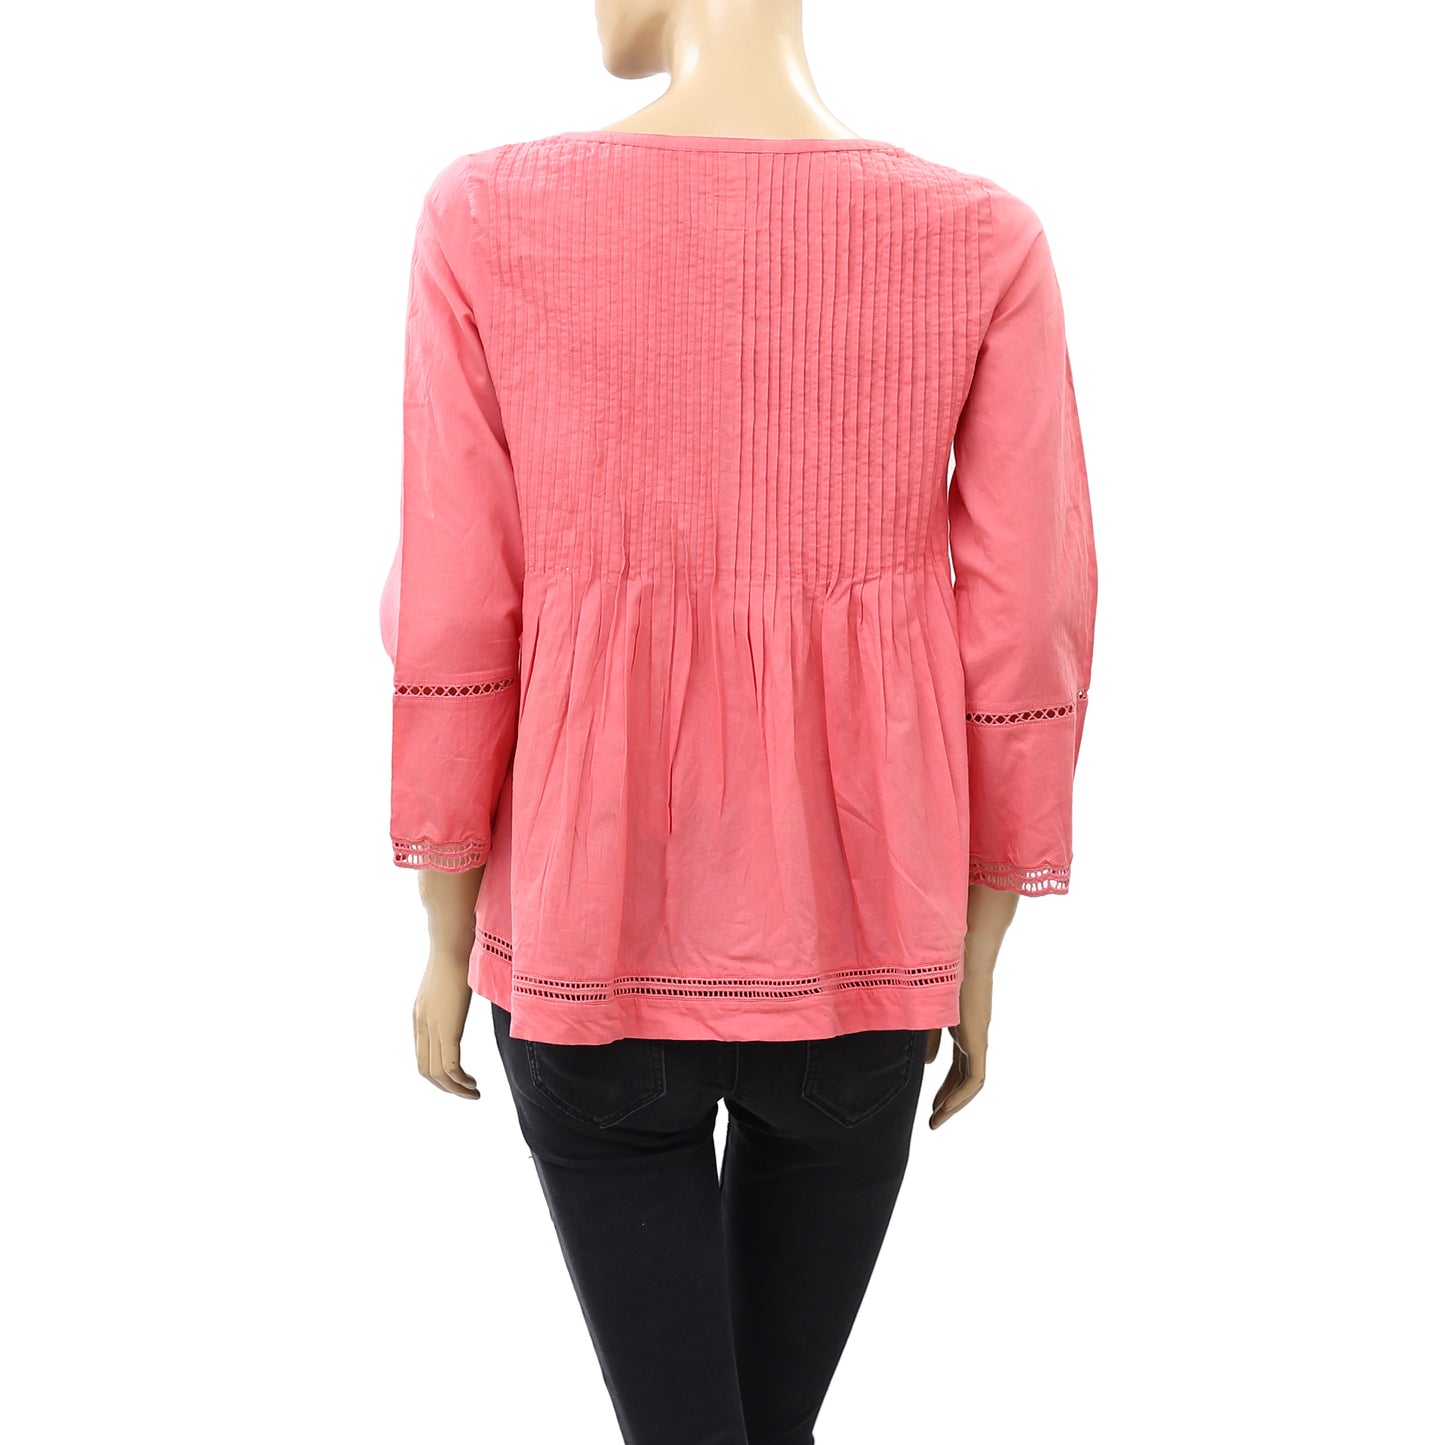 Odd Molly Anthropologie Ladder Lace Pink Blouse Top